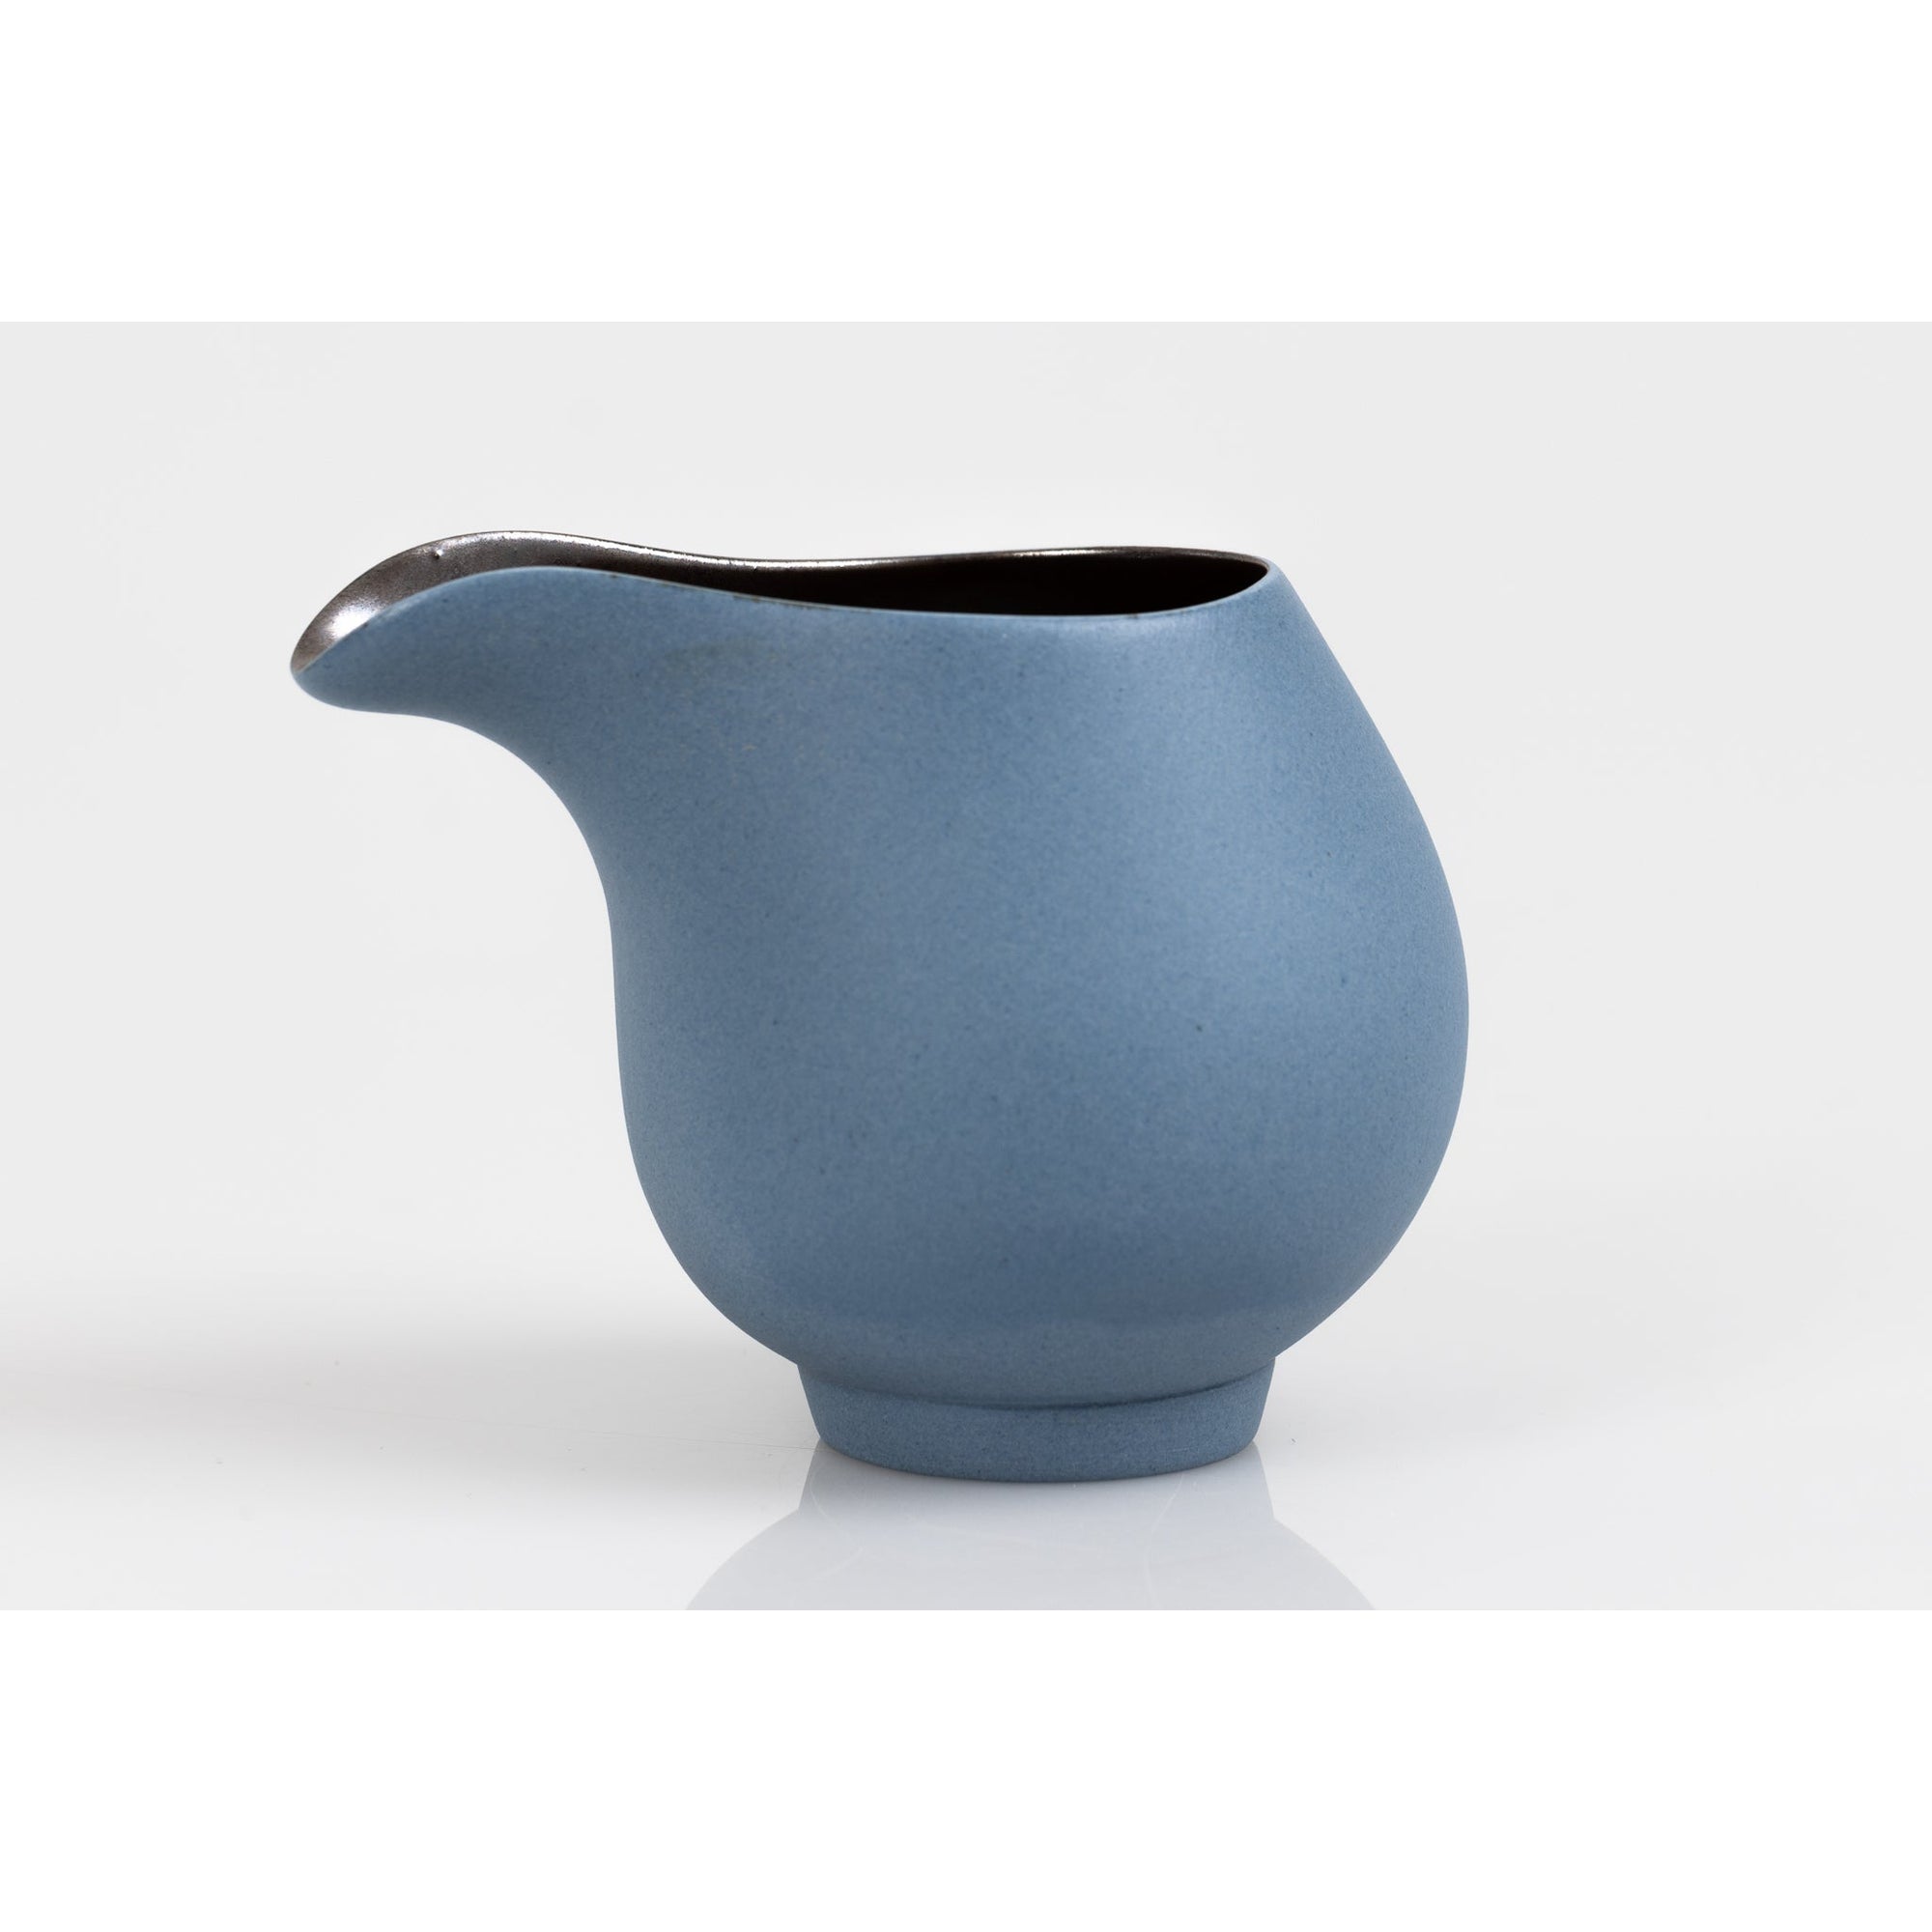 KSC4 Flow, Cornflower Blue Stoneware Jug by Kate Schuricht, available at Padstow Gallery, Cornwall